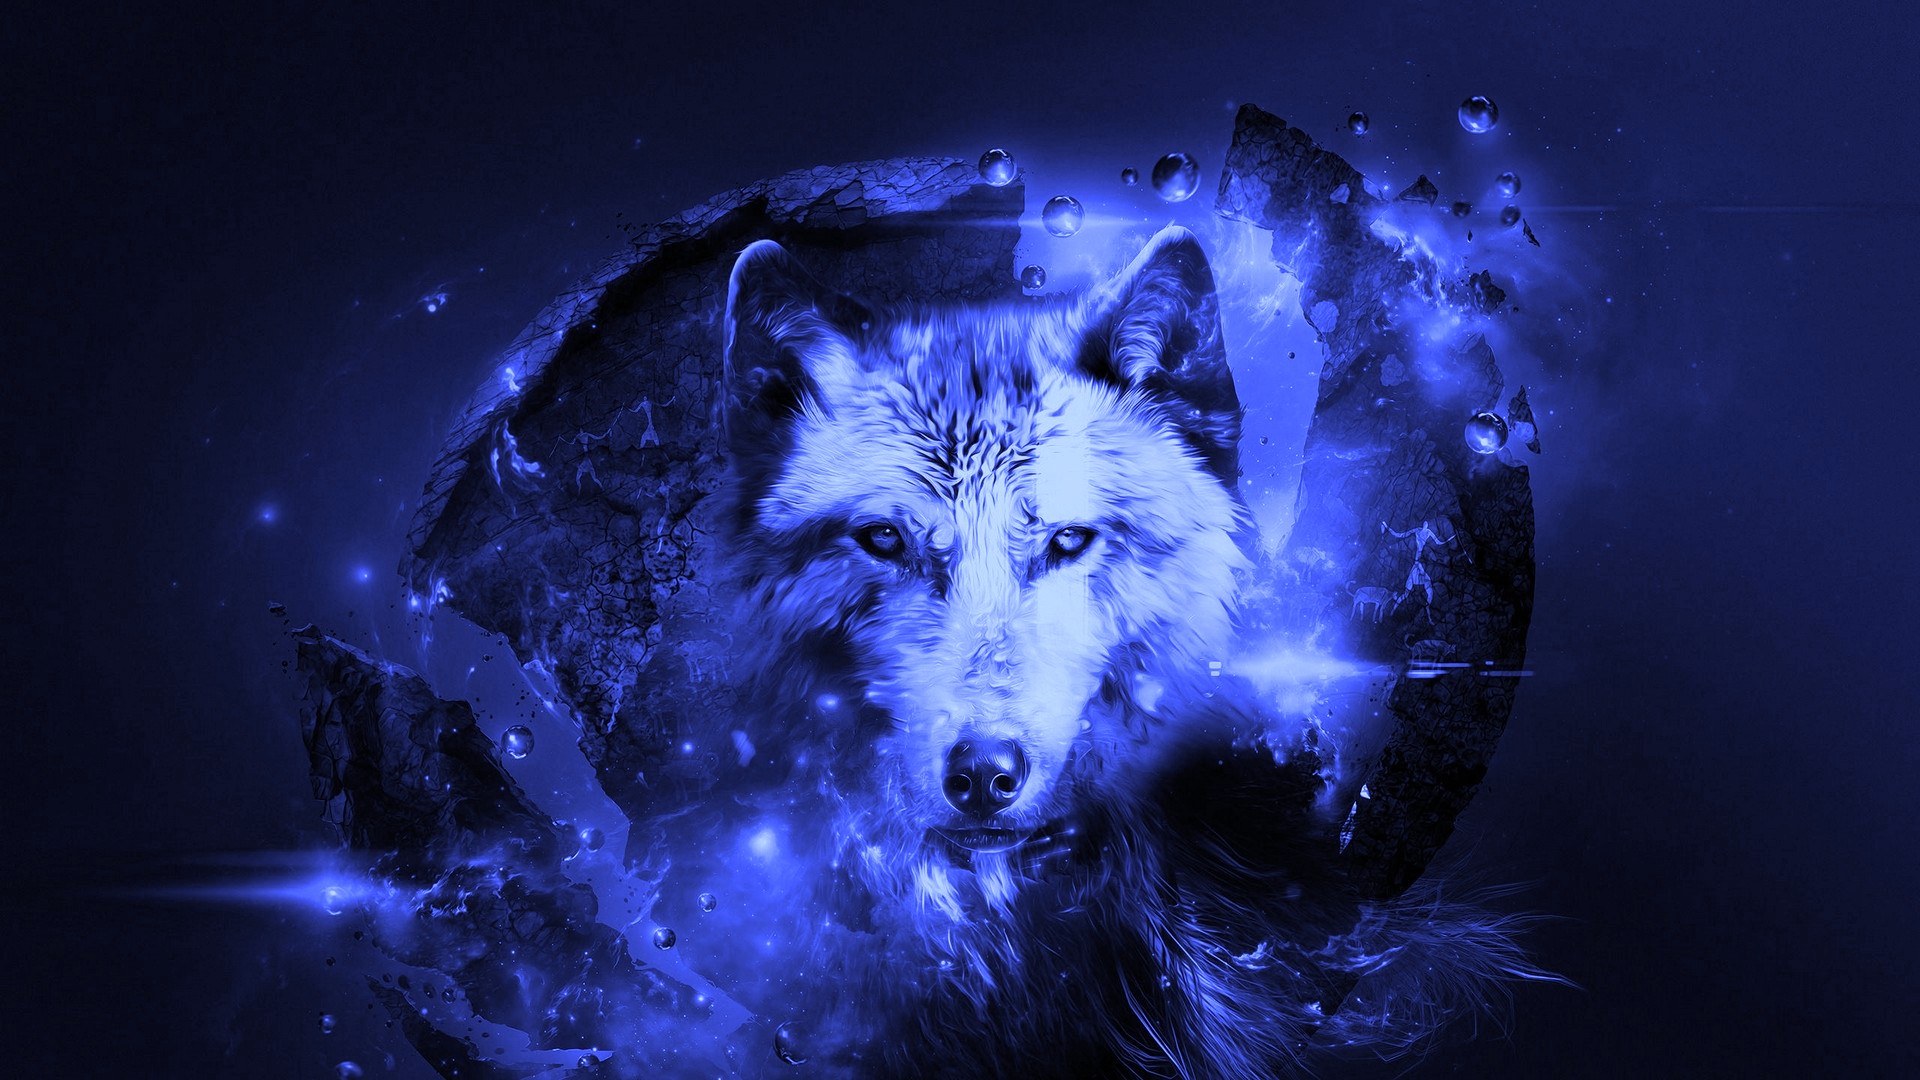 Best Cool Wolf Wallpaper HD With high-resolution 1920X1080 pixel. You can use this wallpaper for your Desktop Computer Backgrounds, Mac Wallpapers, Android Lock screen or iPhone Screensavers and another smartphone device